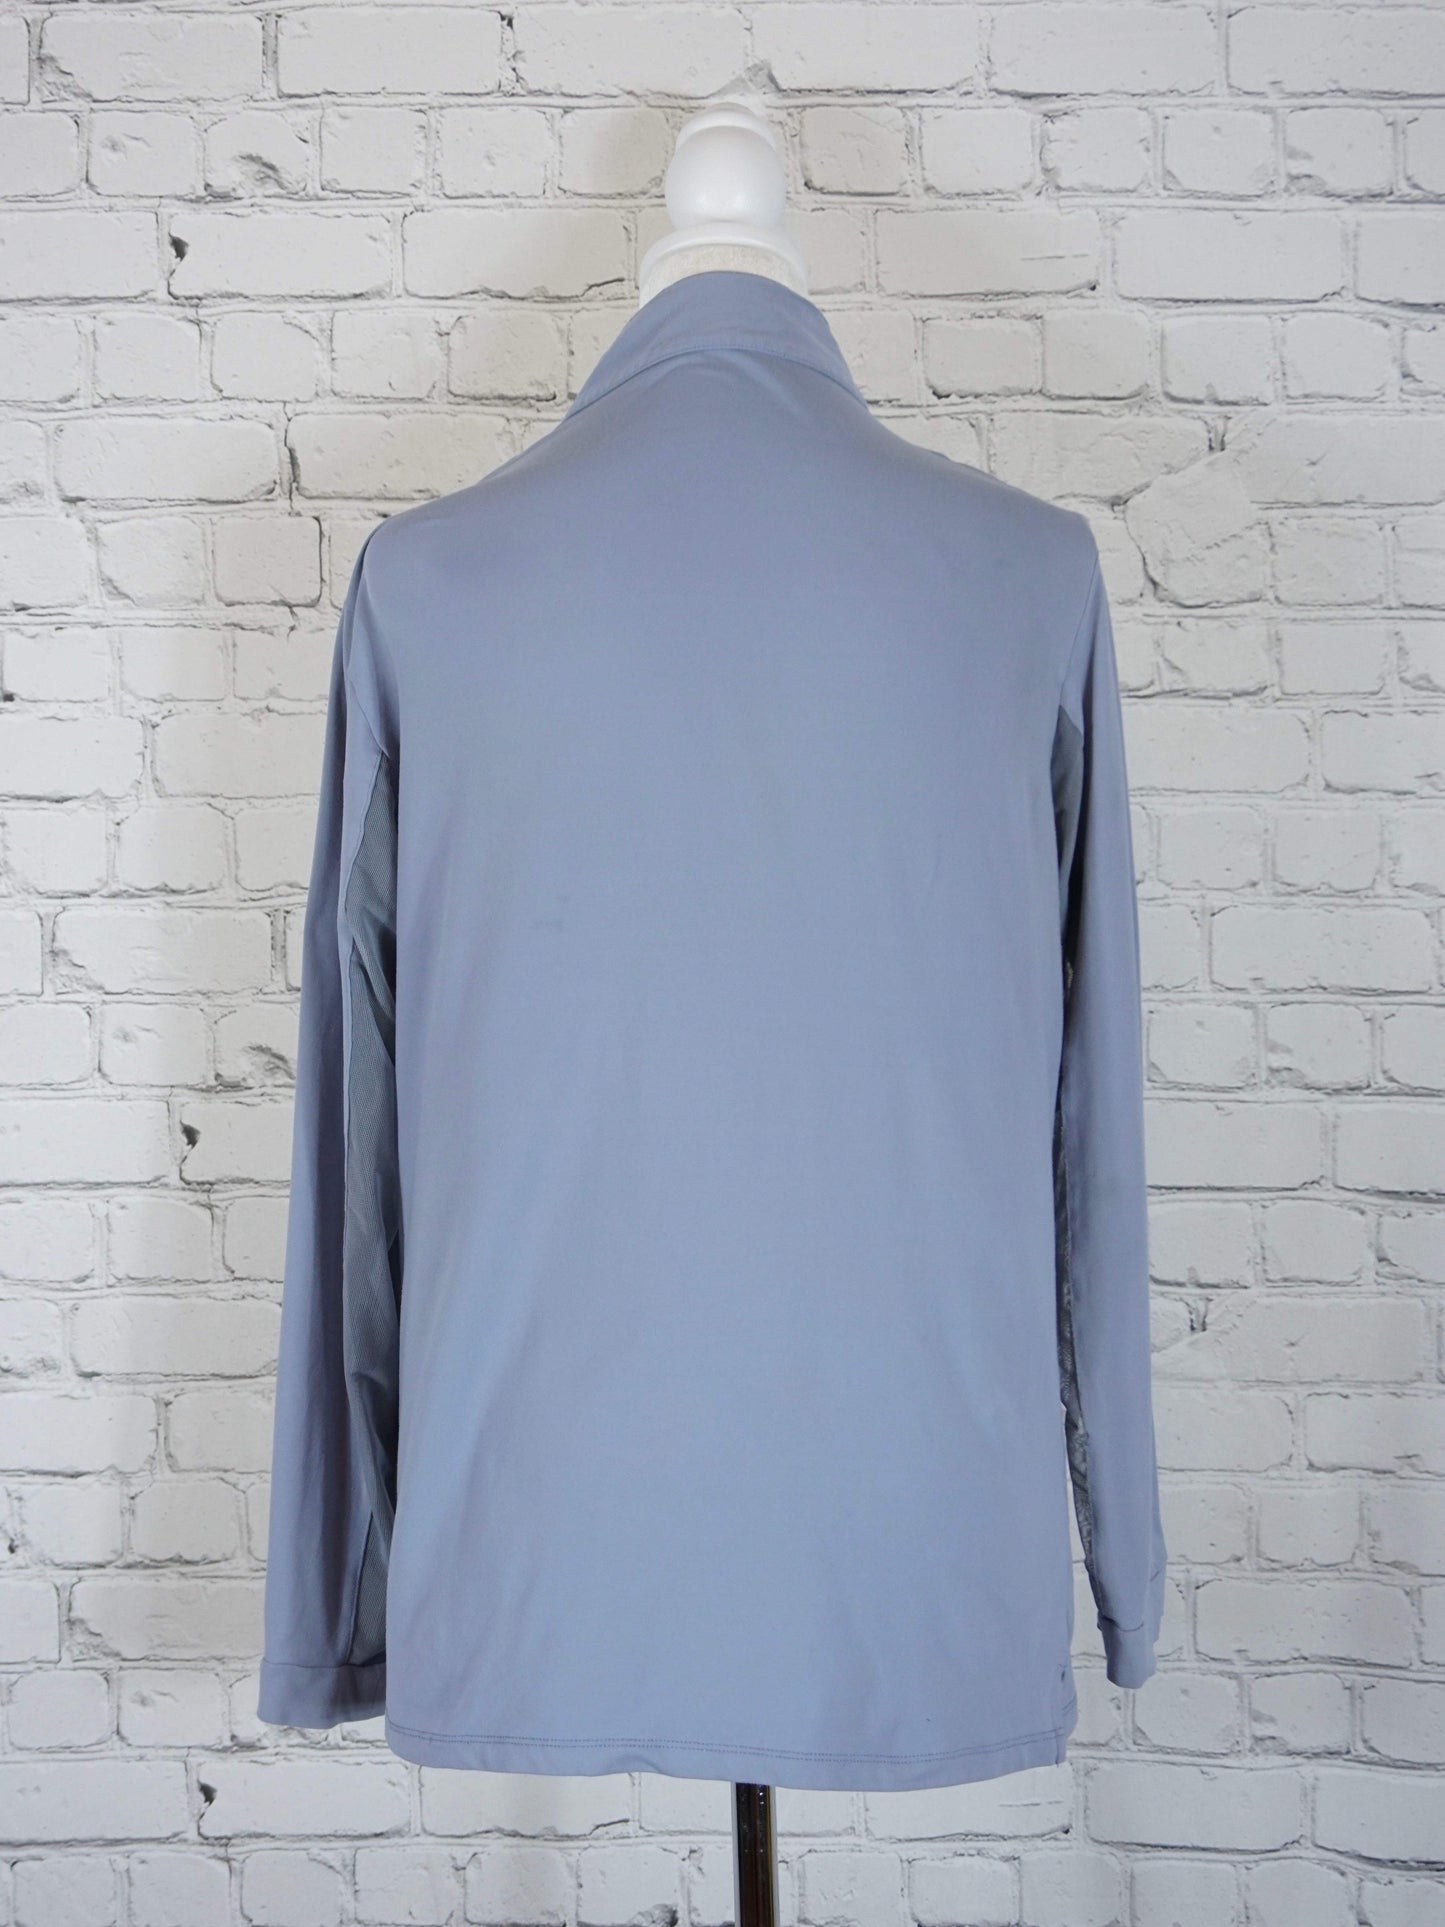 Tailored Sportsman Long Seelve IceFil Sun Shirt in Cloudy Blue- Large